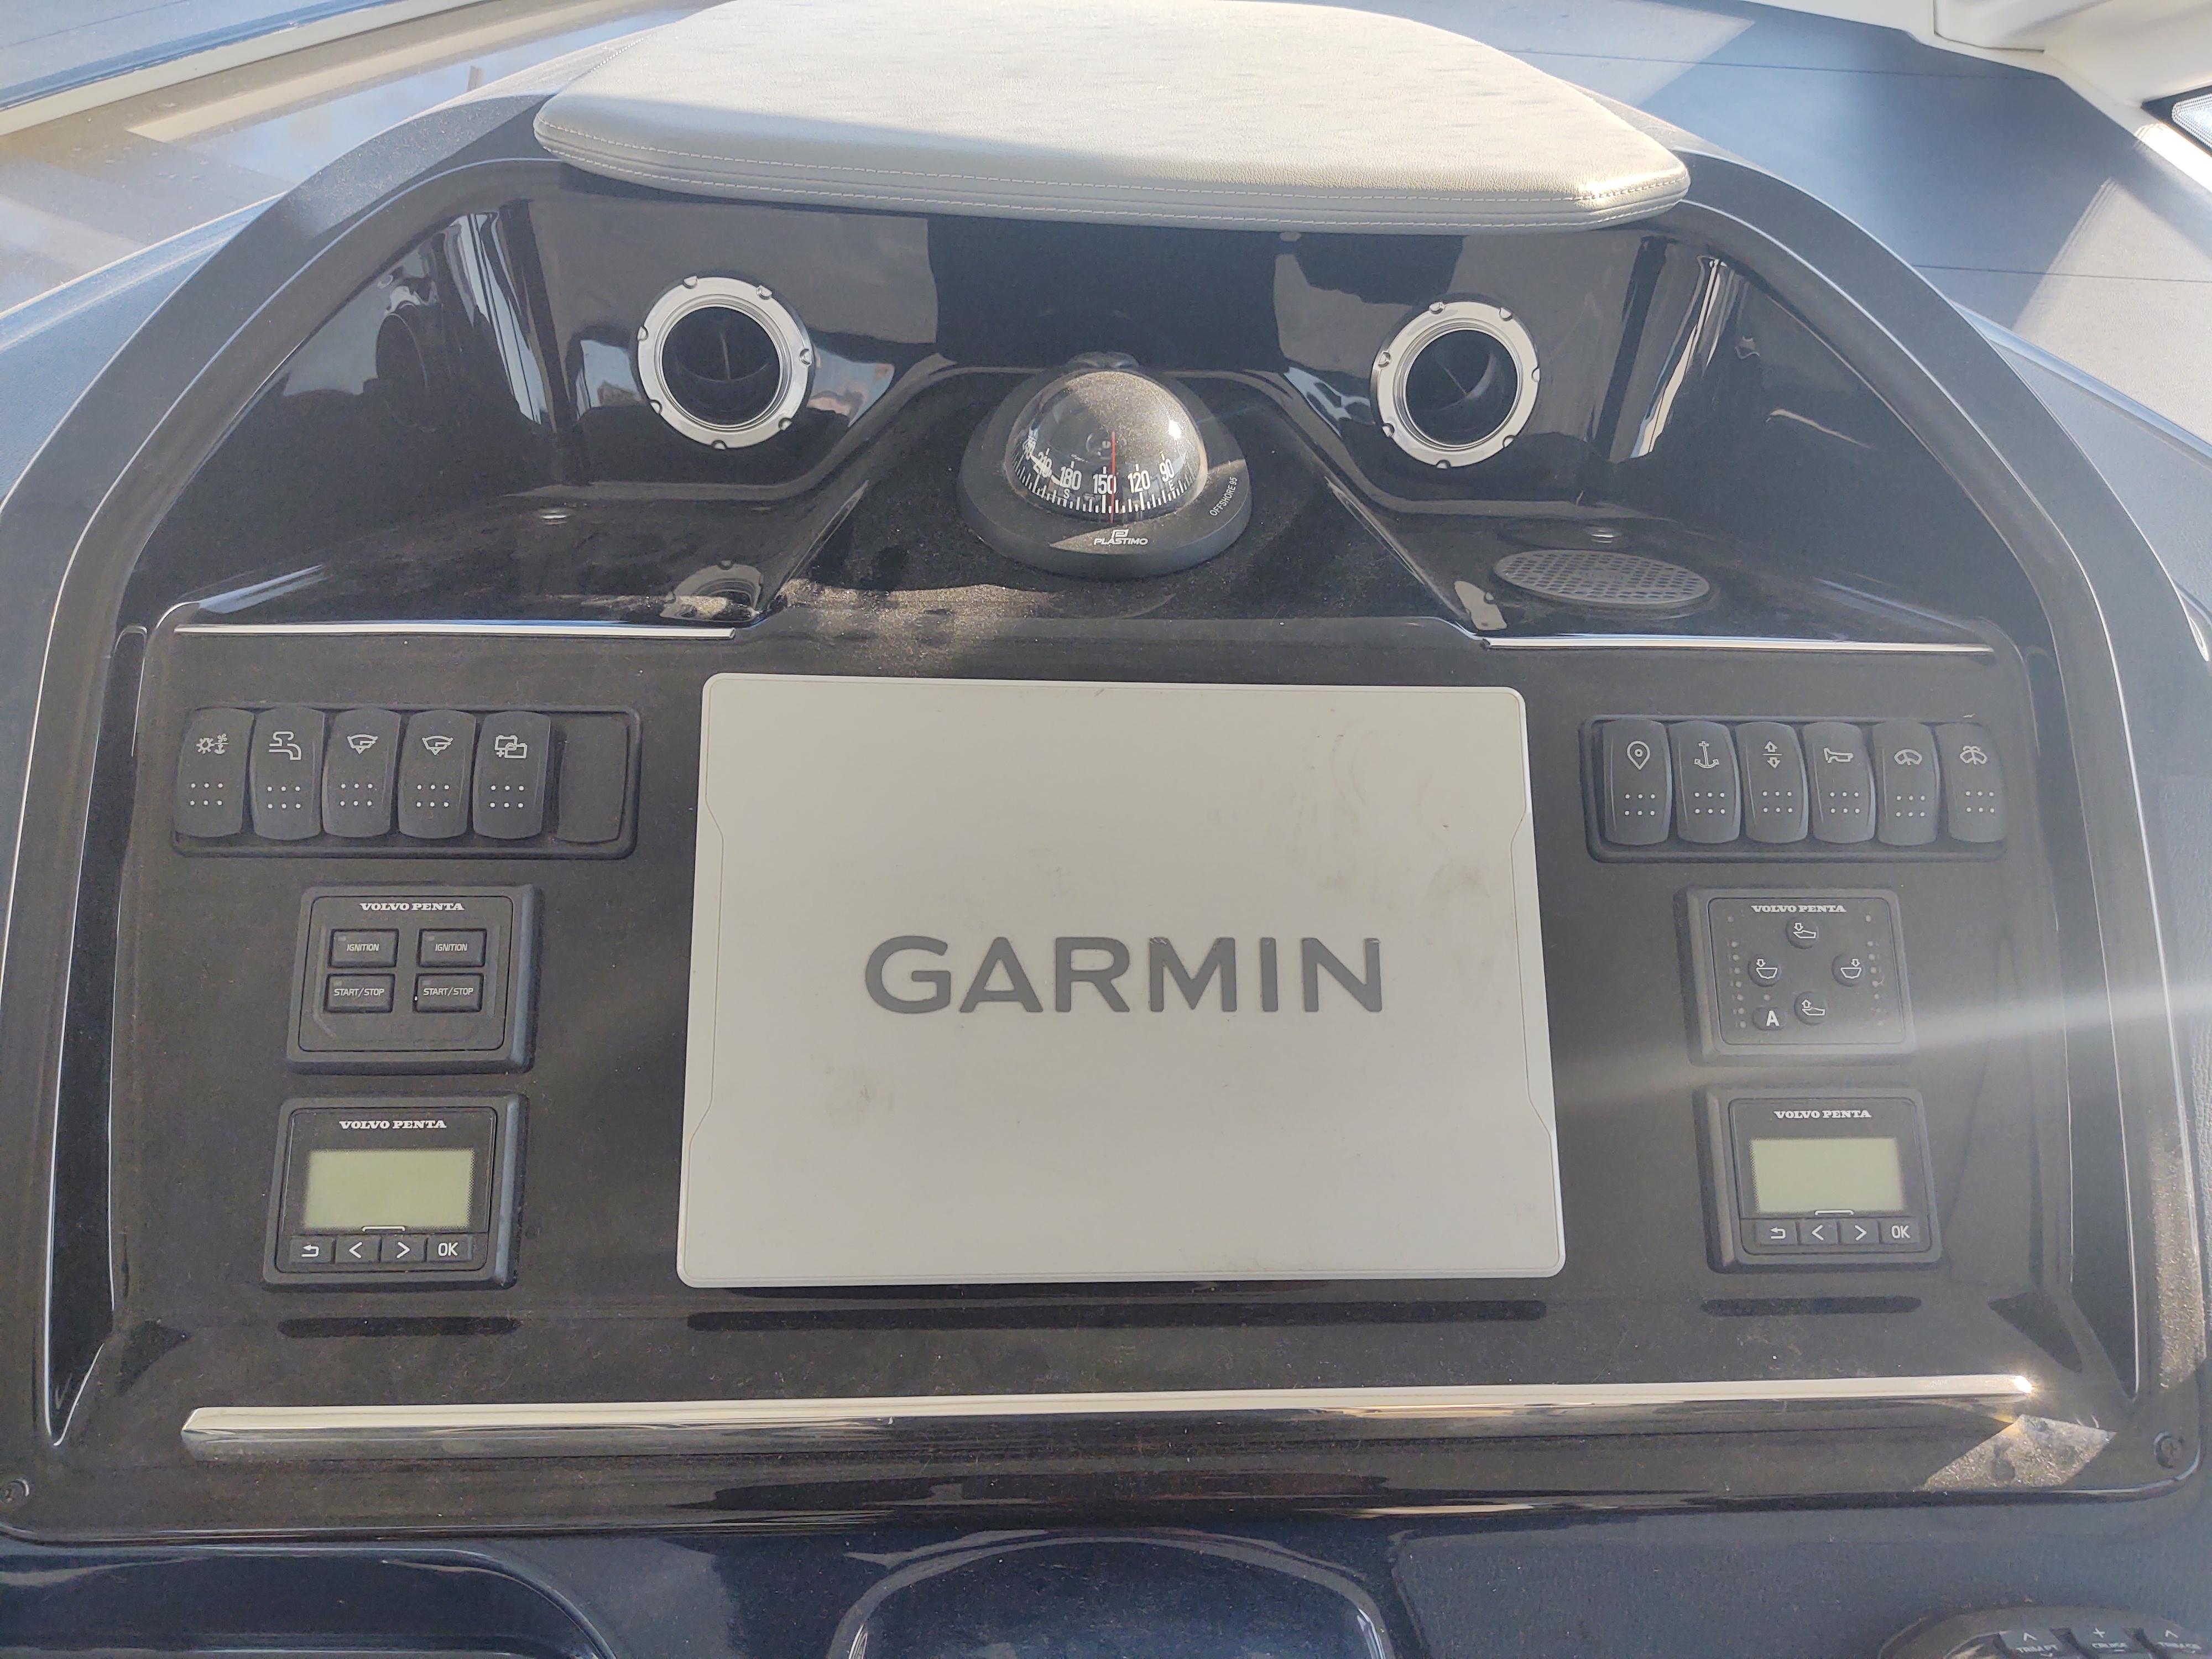 GT 41 Helm Console